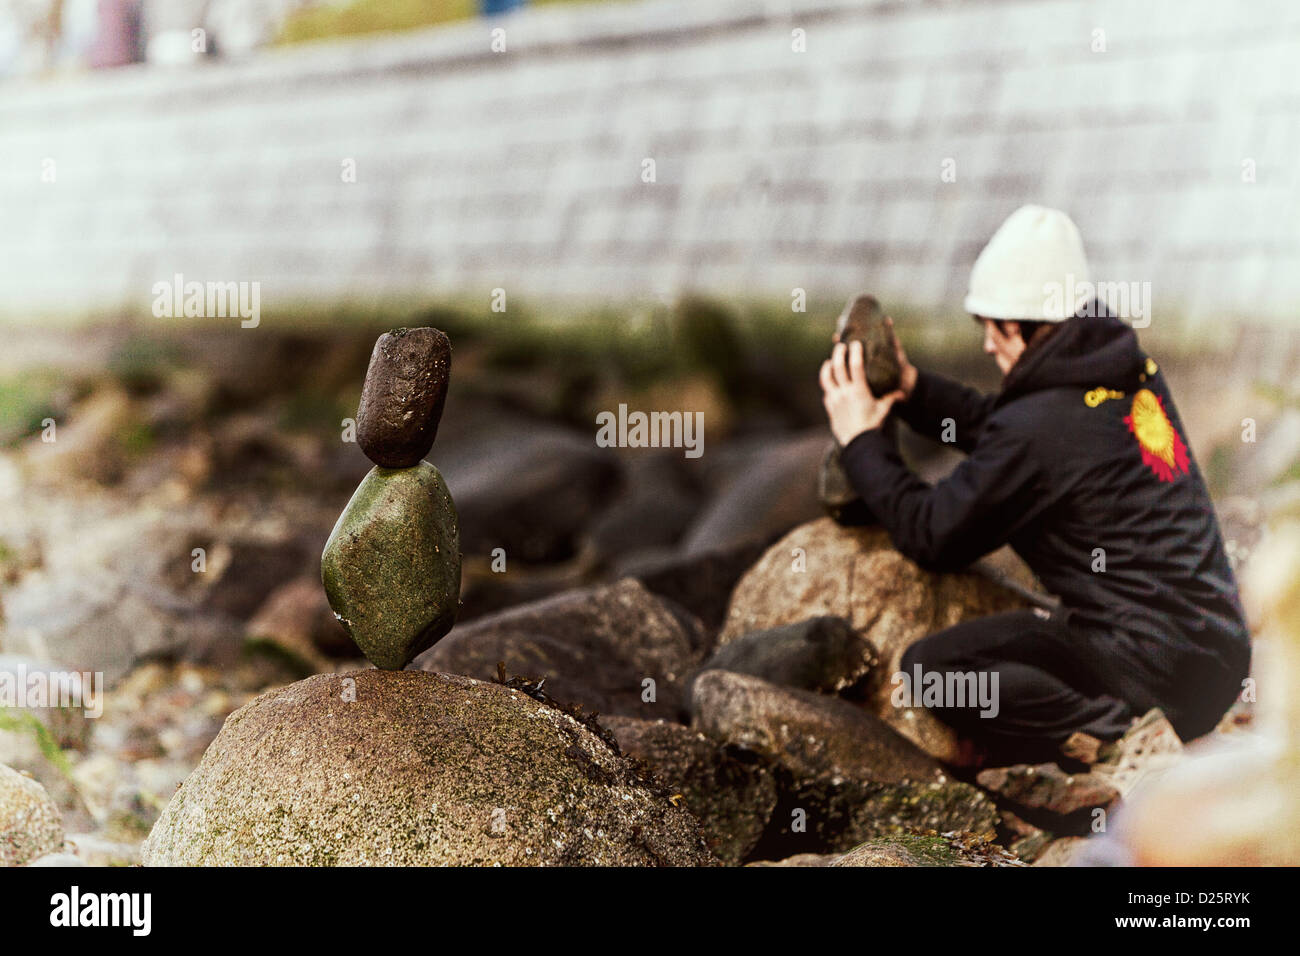 young man wearing a white toque or hat on the rocky beach of English Bay, stacking stone. Stock Photo